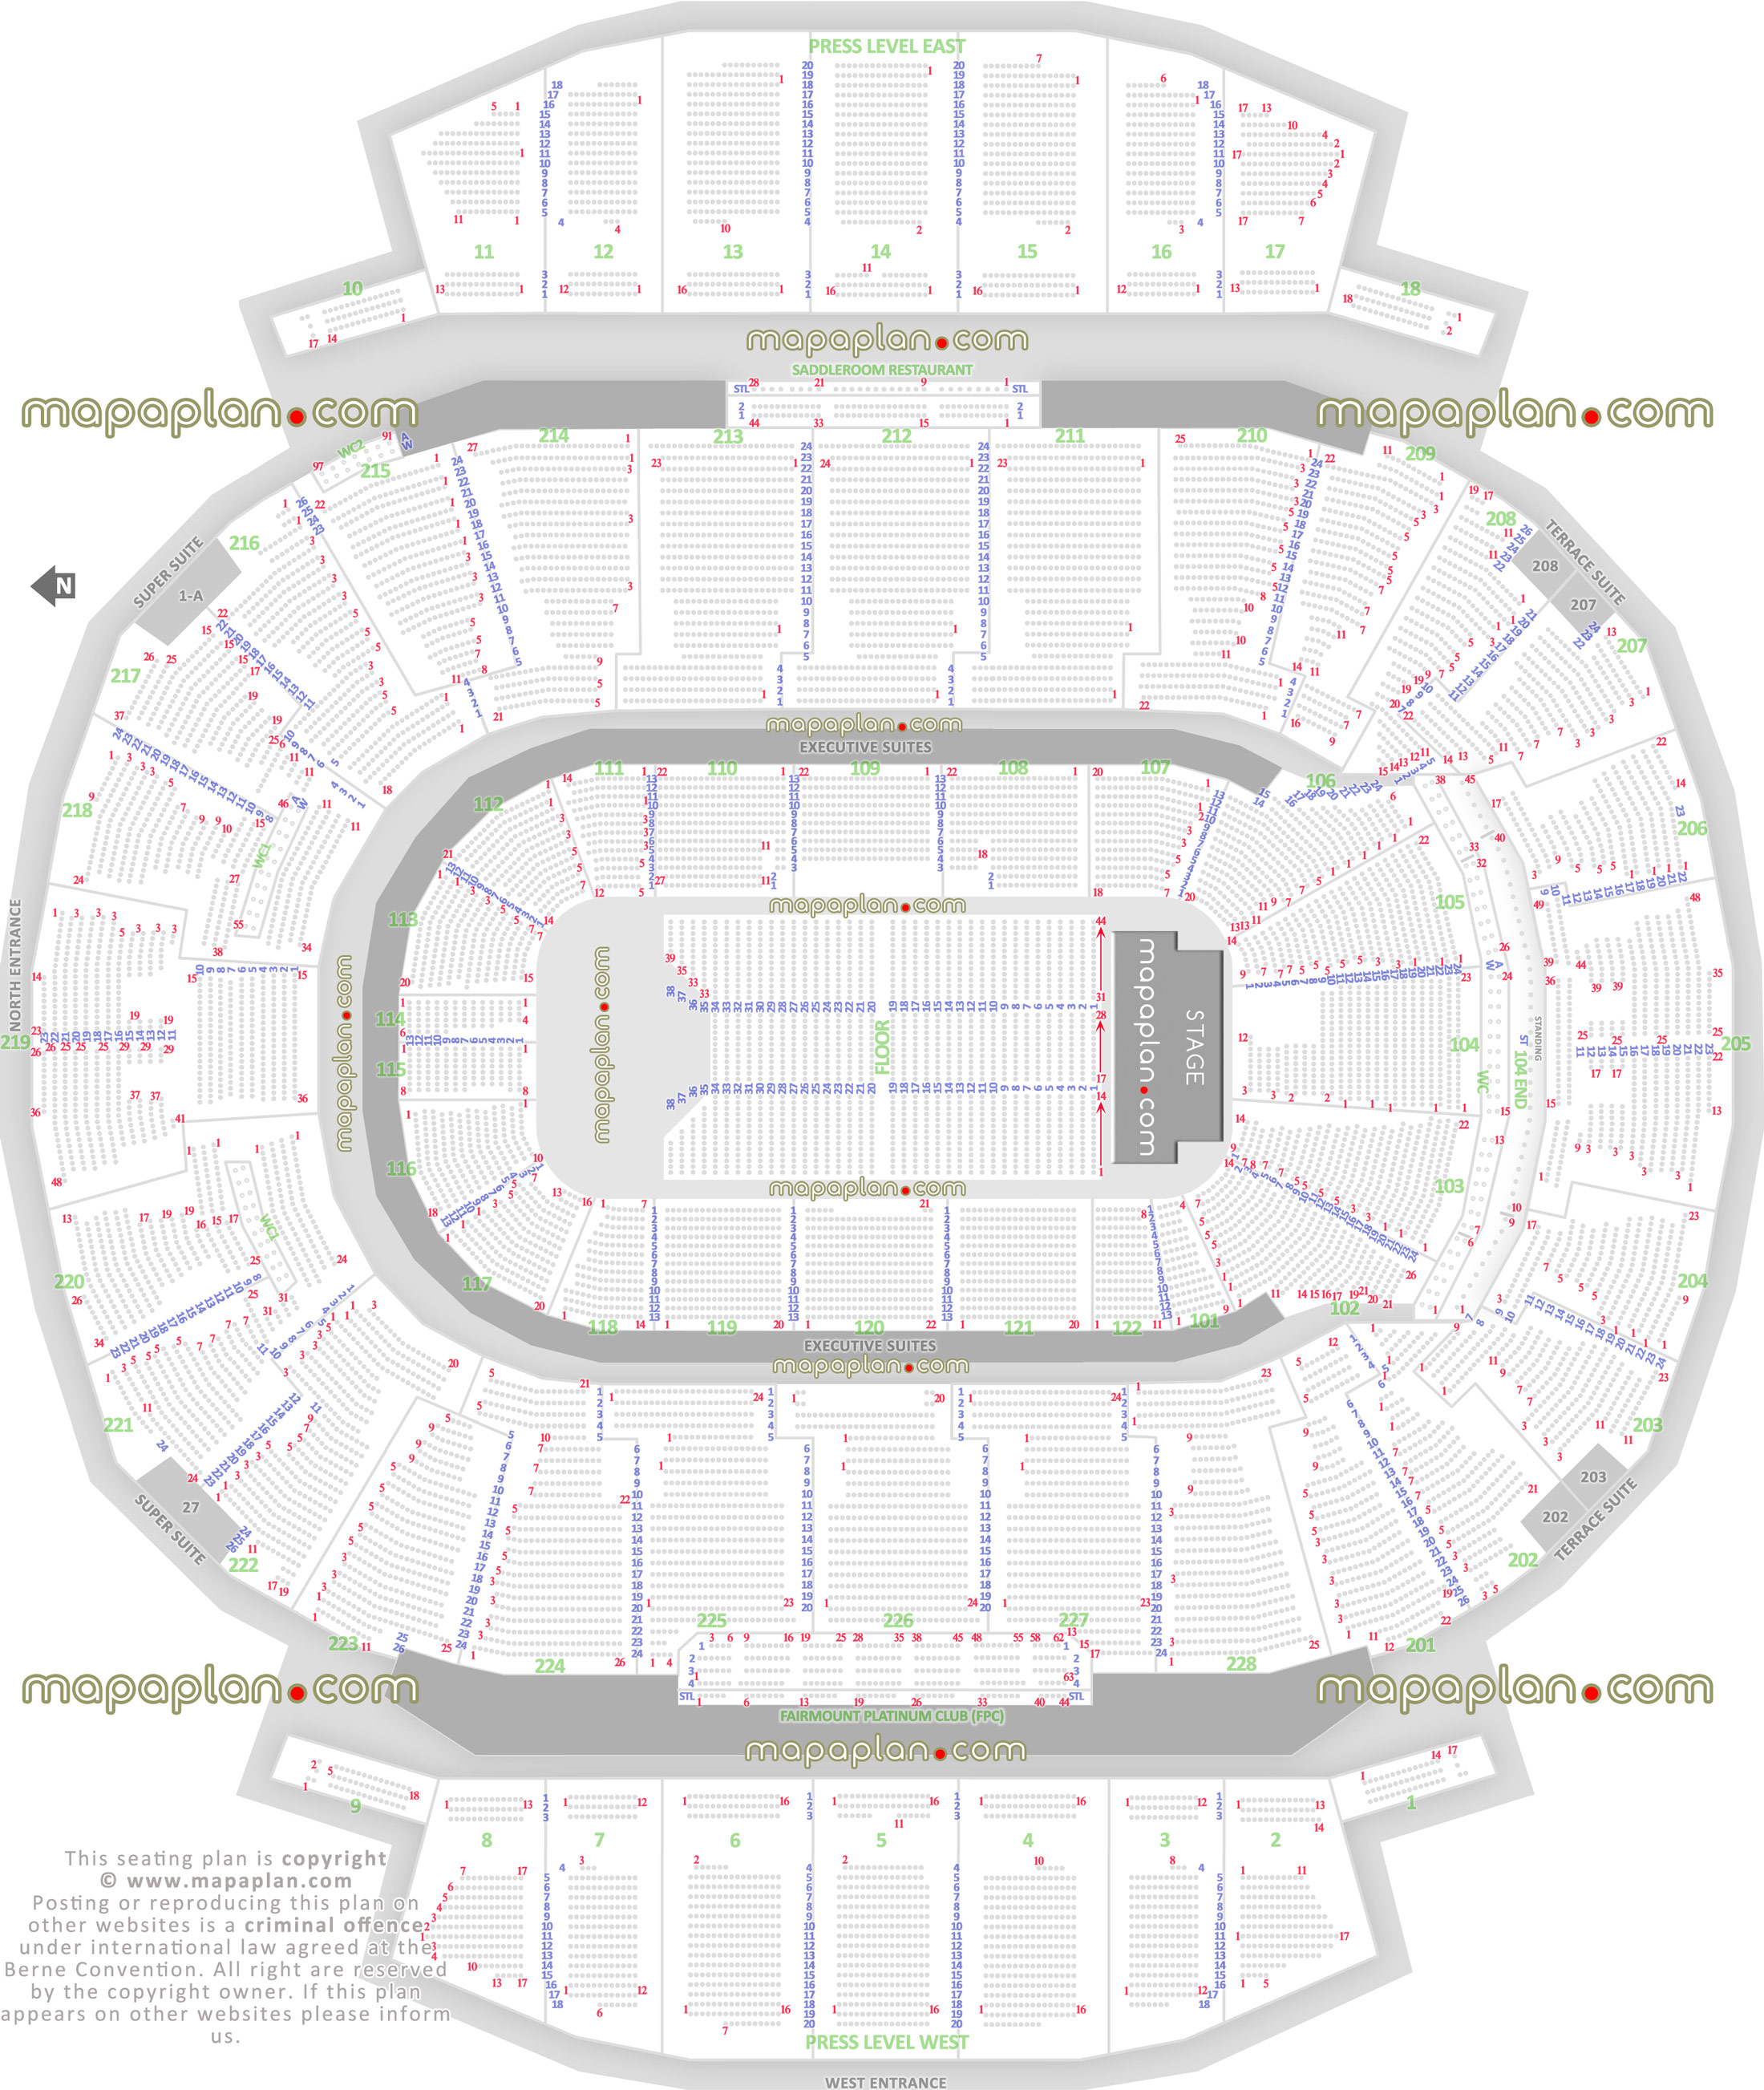 detailed seat row numbers end stage concert sections floor plan map arena lower club press level layout Calgary Scotiabank Saddledome seating chart